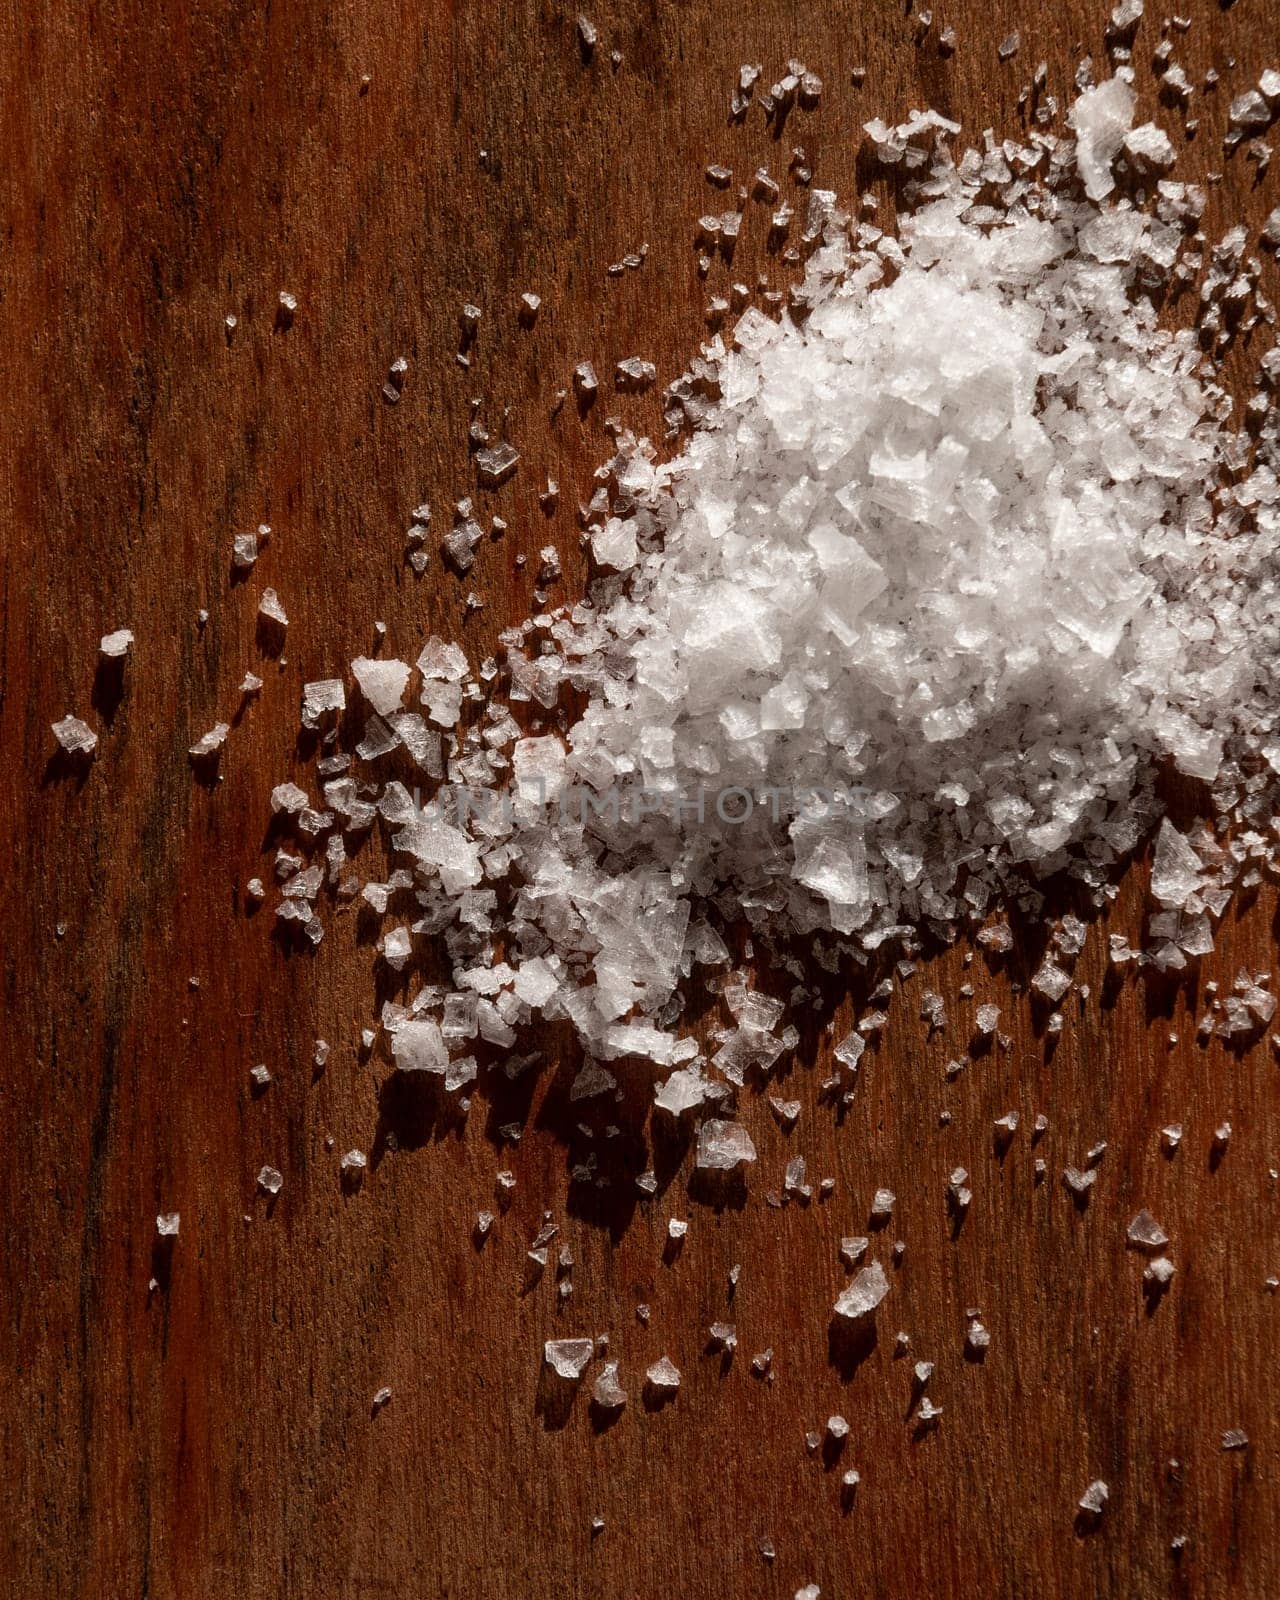 A Pile Of Salt Is On A Wooden Table by apavlin